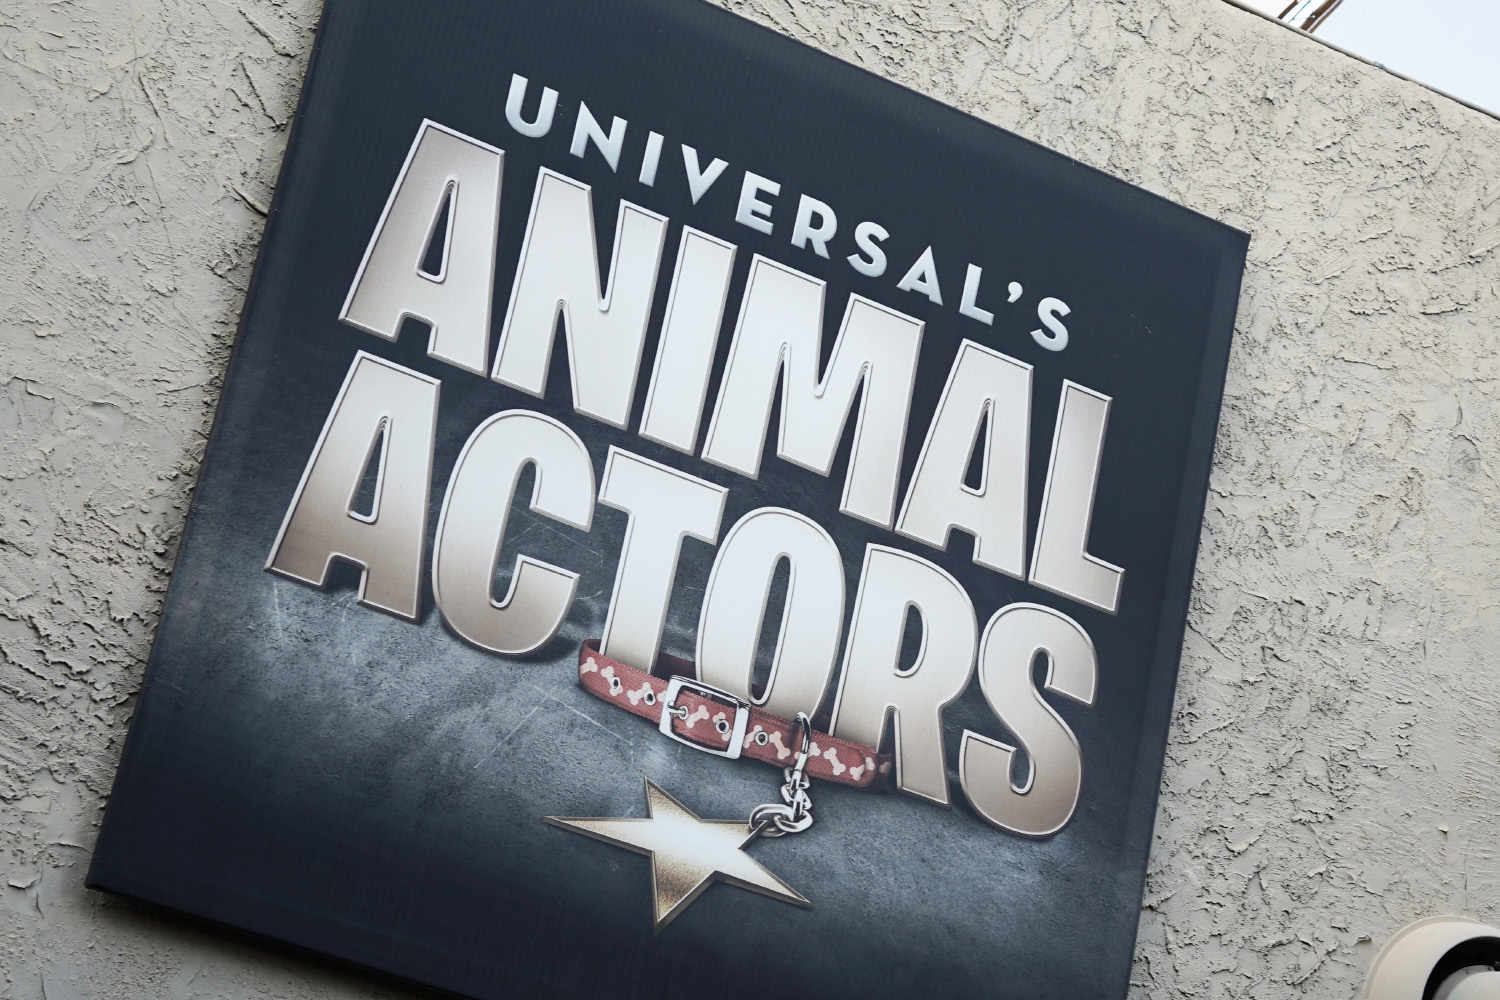 Special Effects Show and Animal Actors to permanently close at Universal  Studios Hollywood | Inside Universal